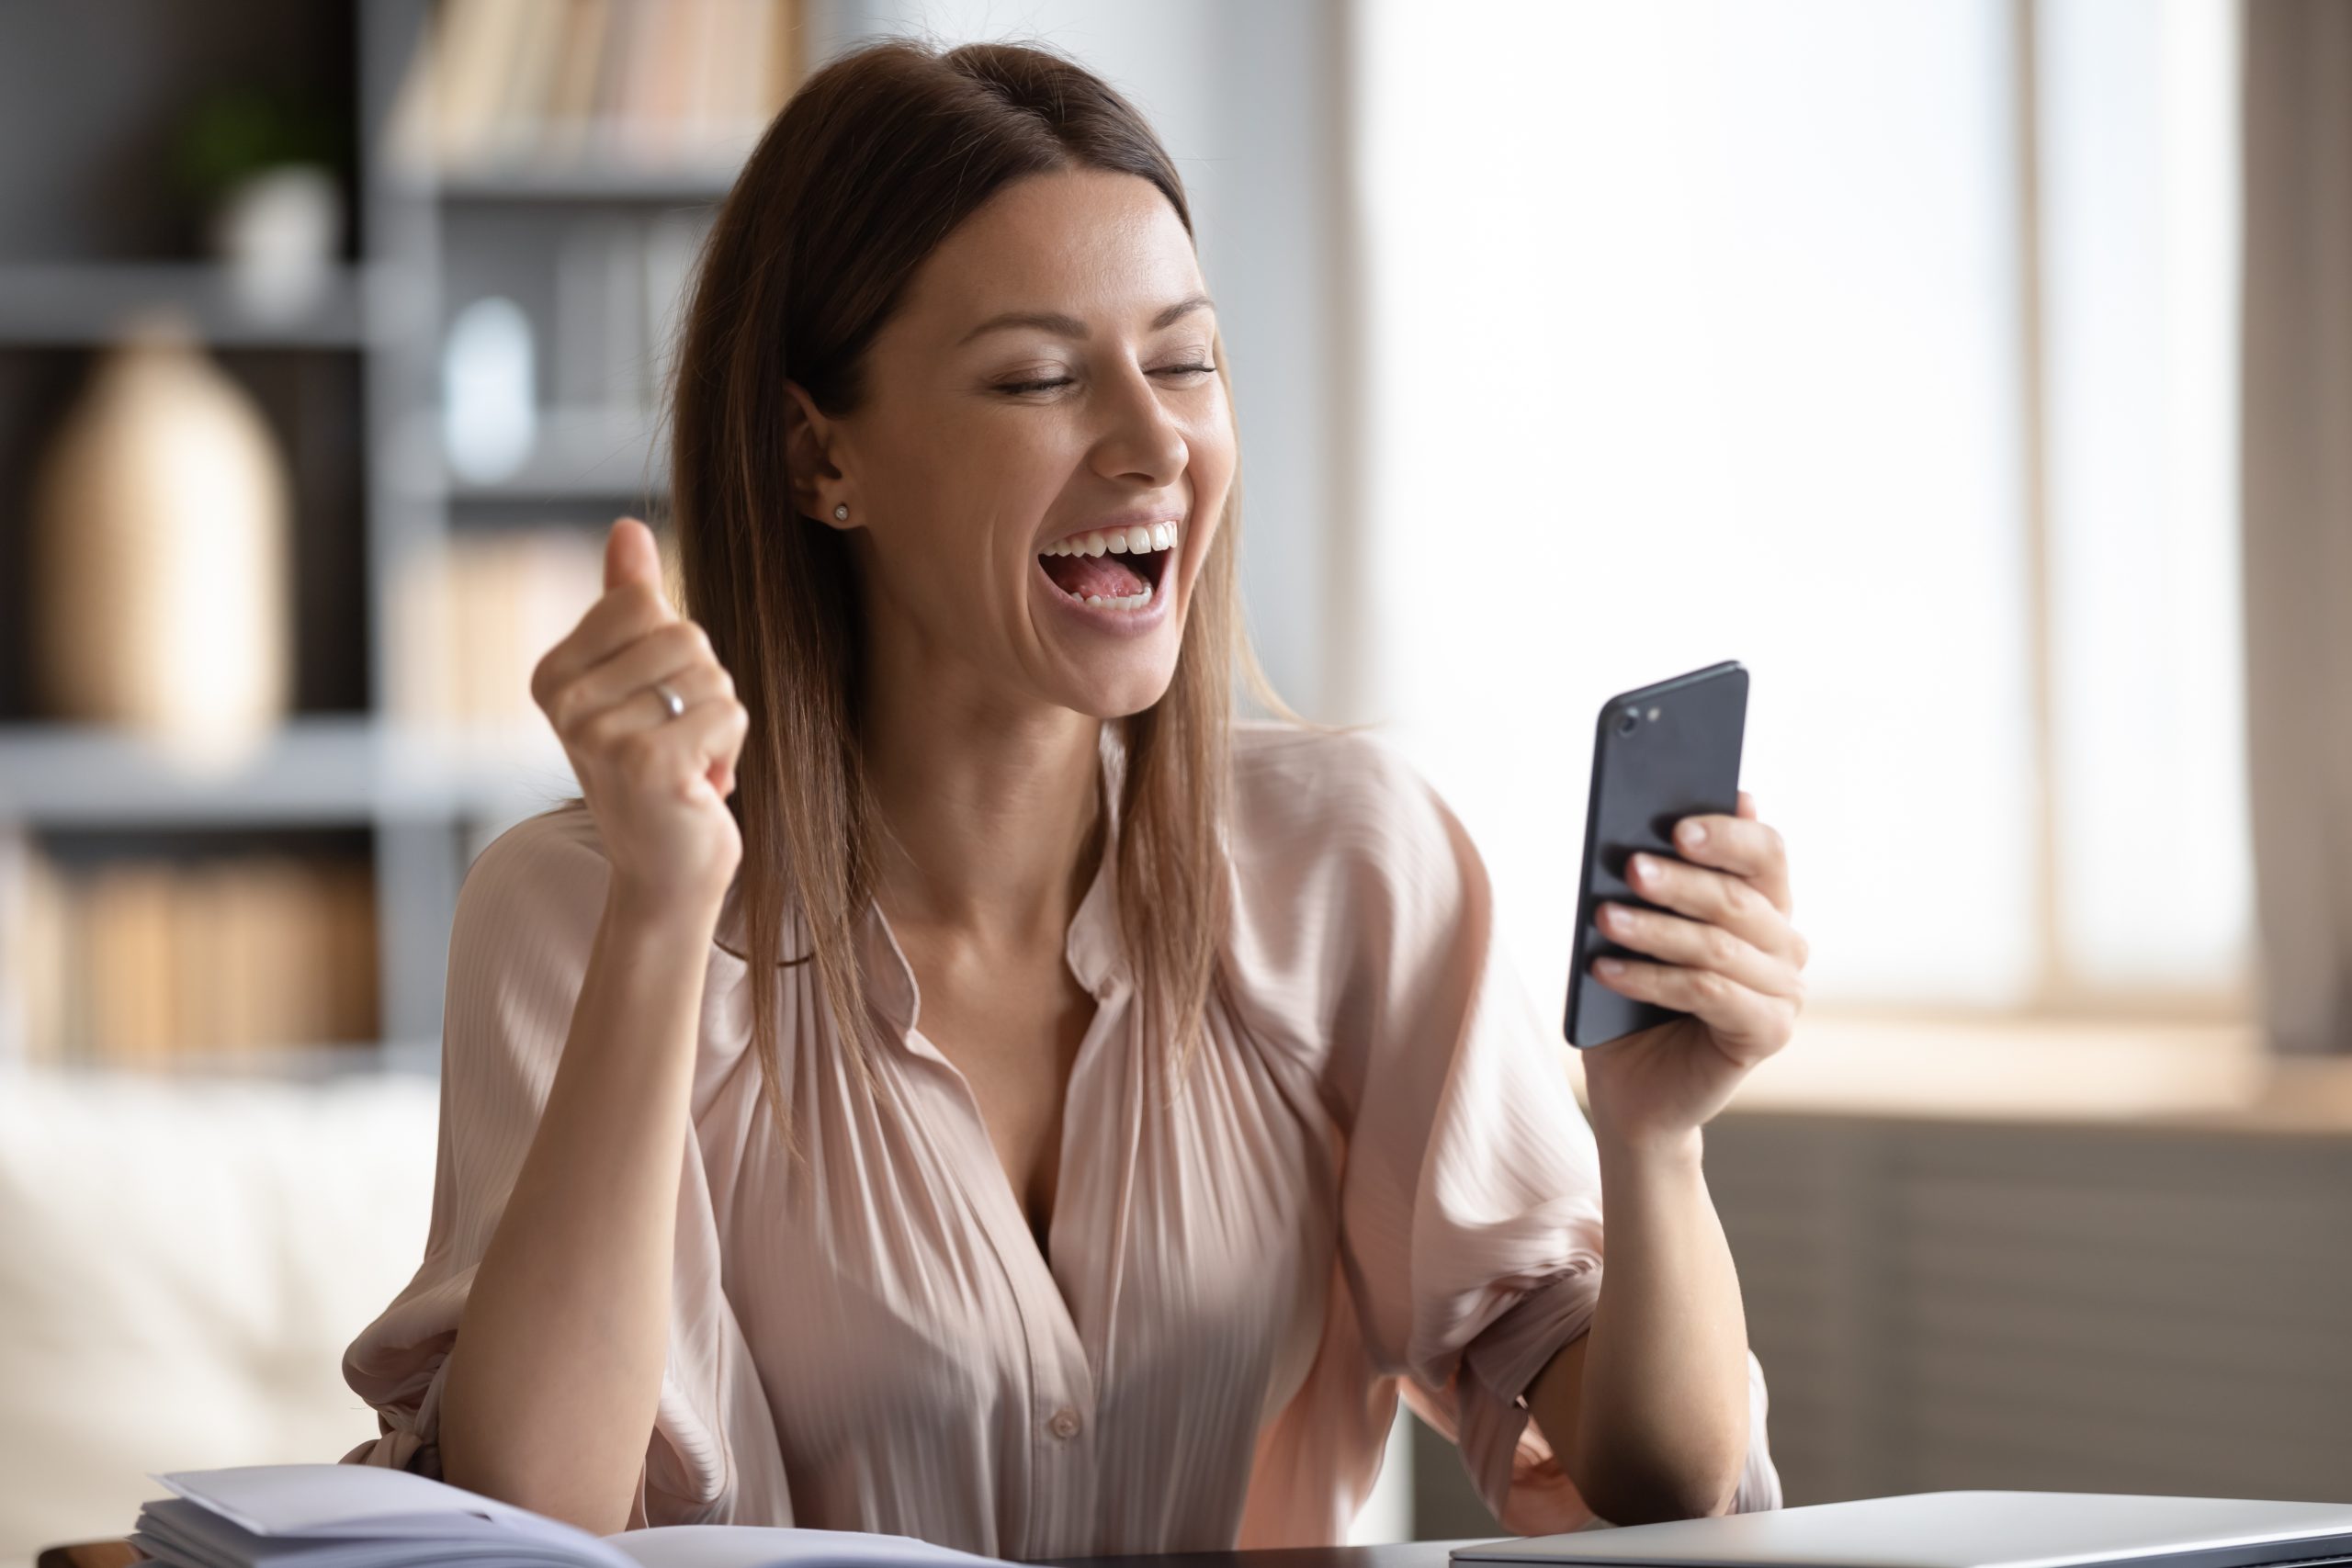 Excited woman looking at phone screen, celebrating online win